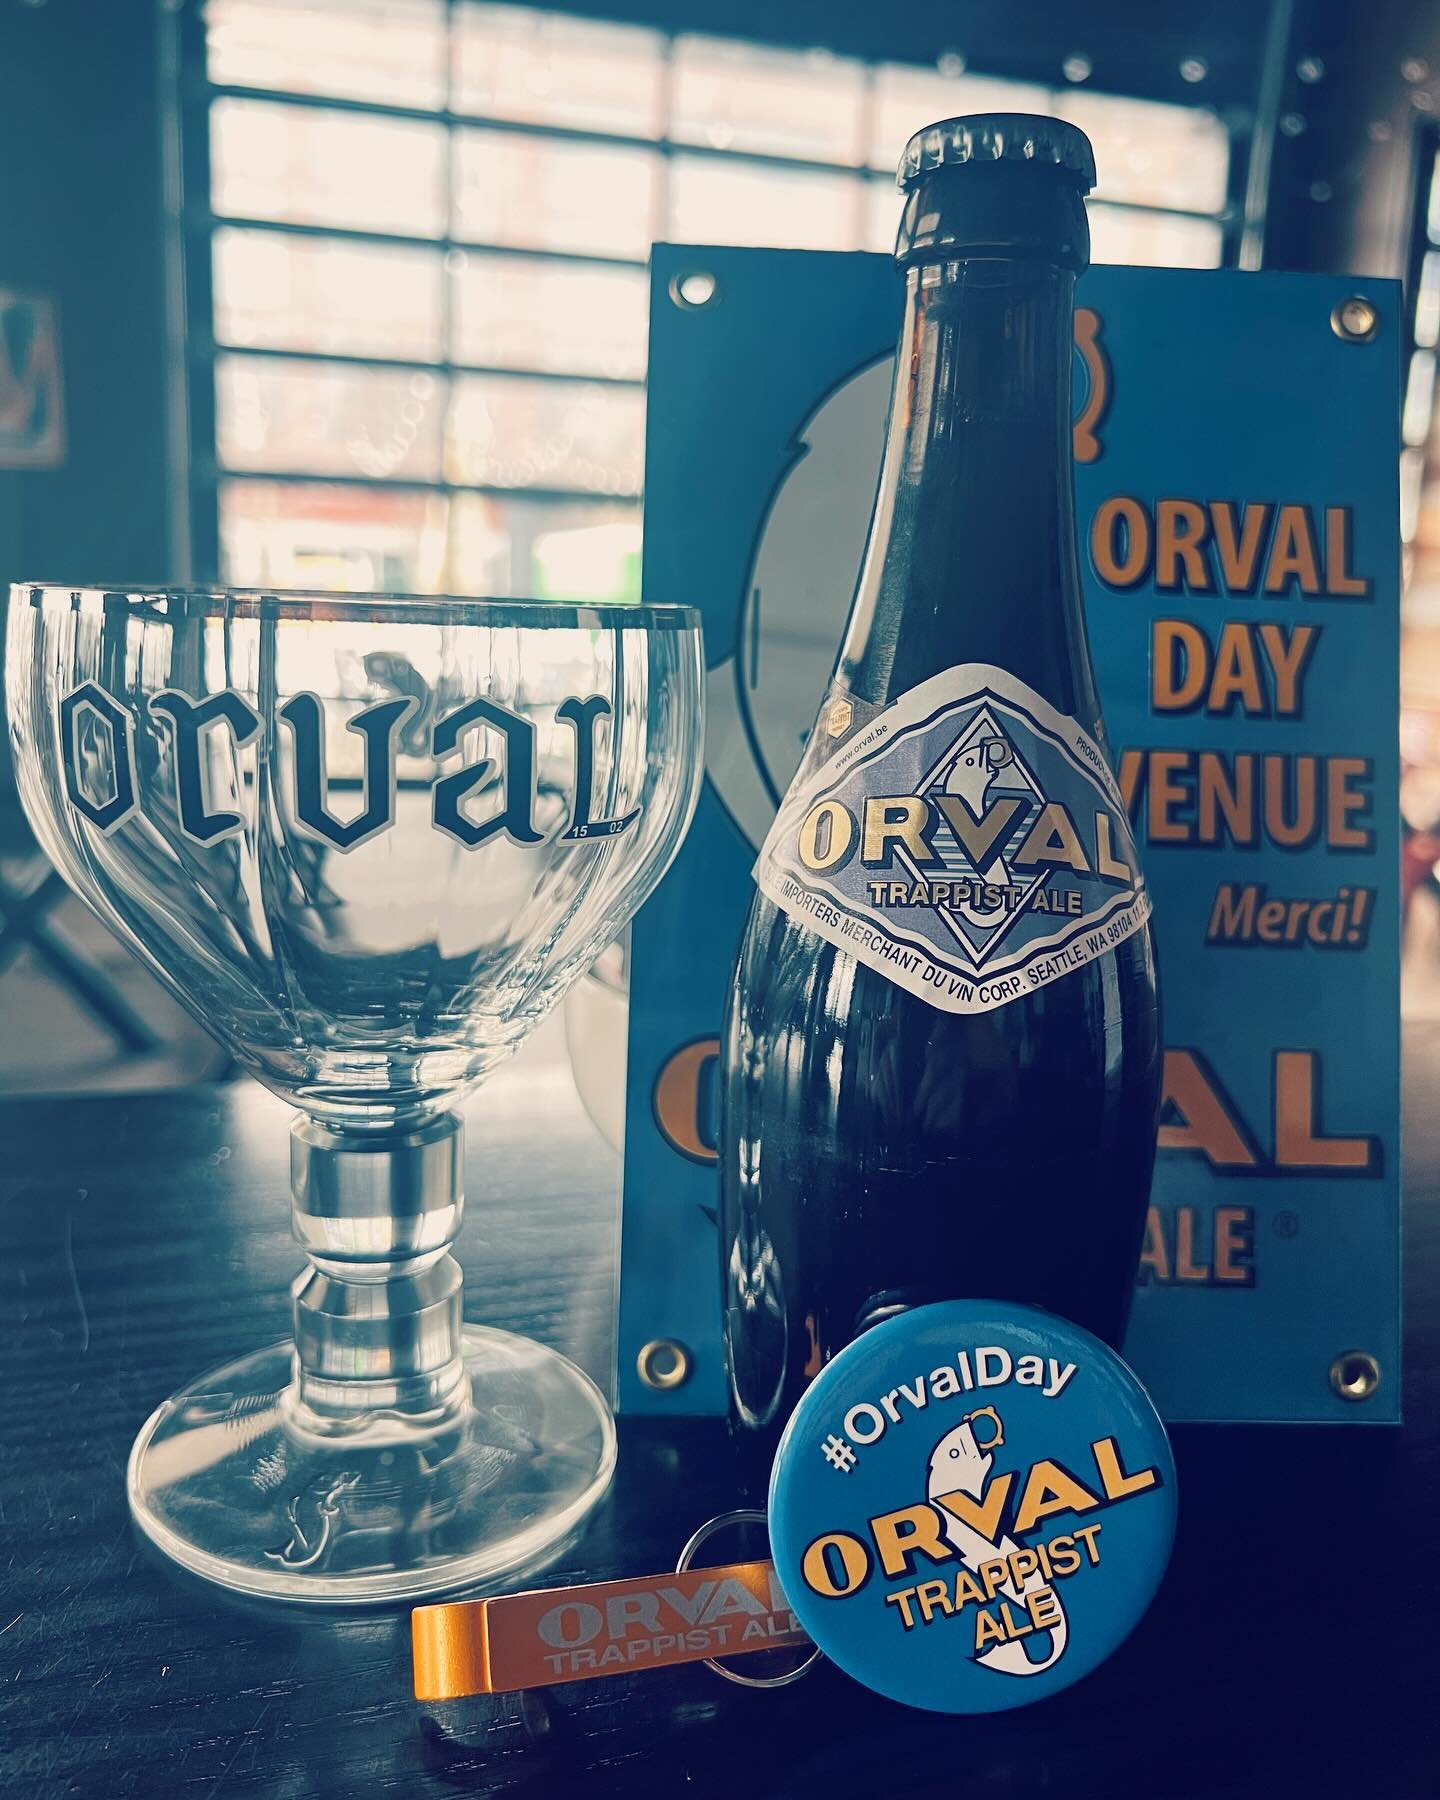 Happy Orval Day!! 

The Orval legend began almost 1,000 years ago, when a princess accidentally dropped her ring into a spring and a trout returned it. It continues now, with a day to reflect on and enjoy this amazing Trappist ale. Stop in and taste 